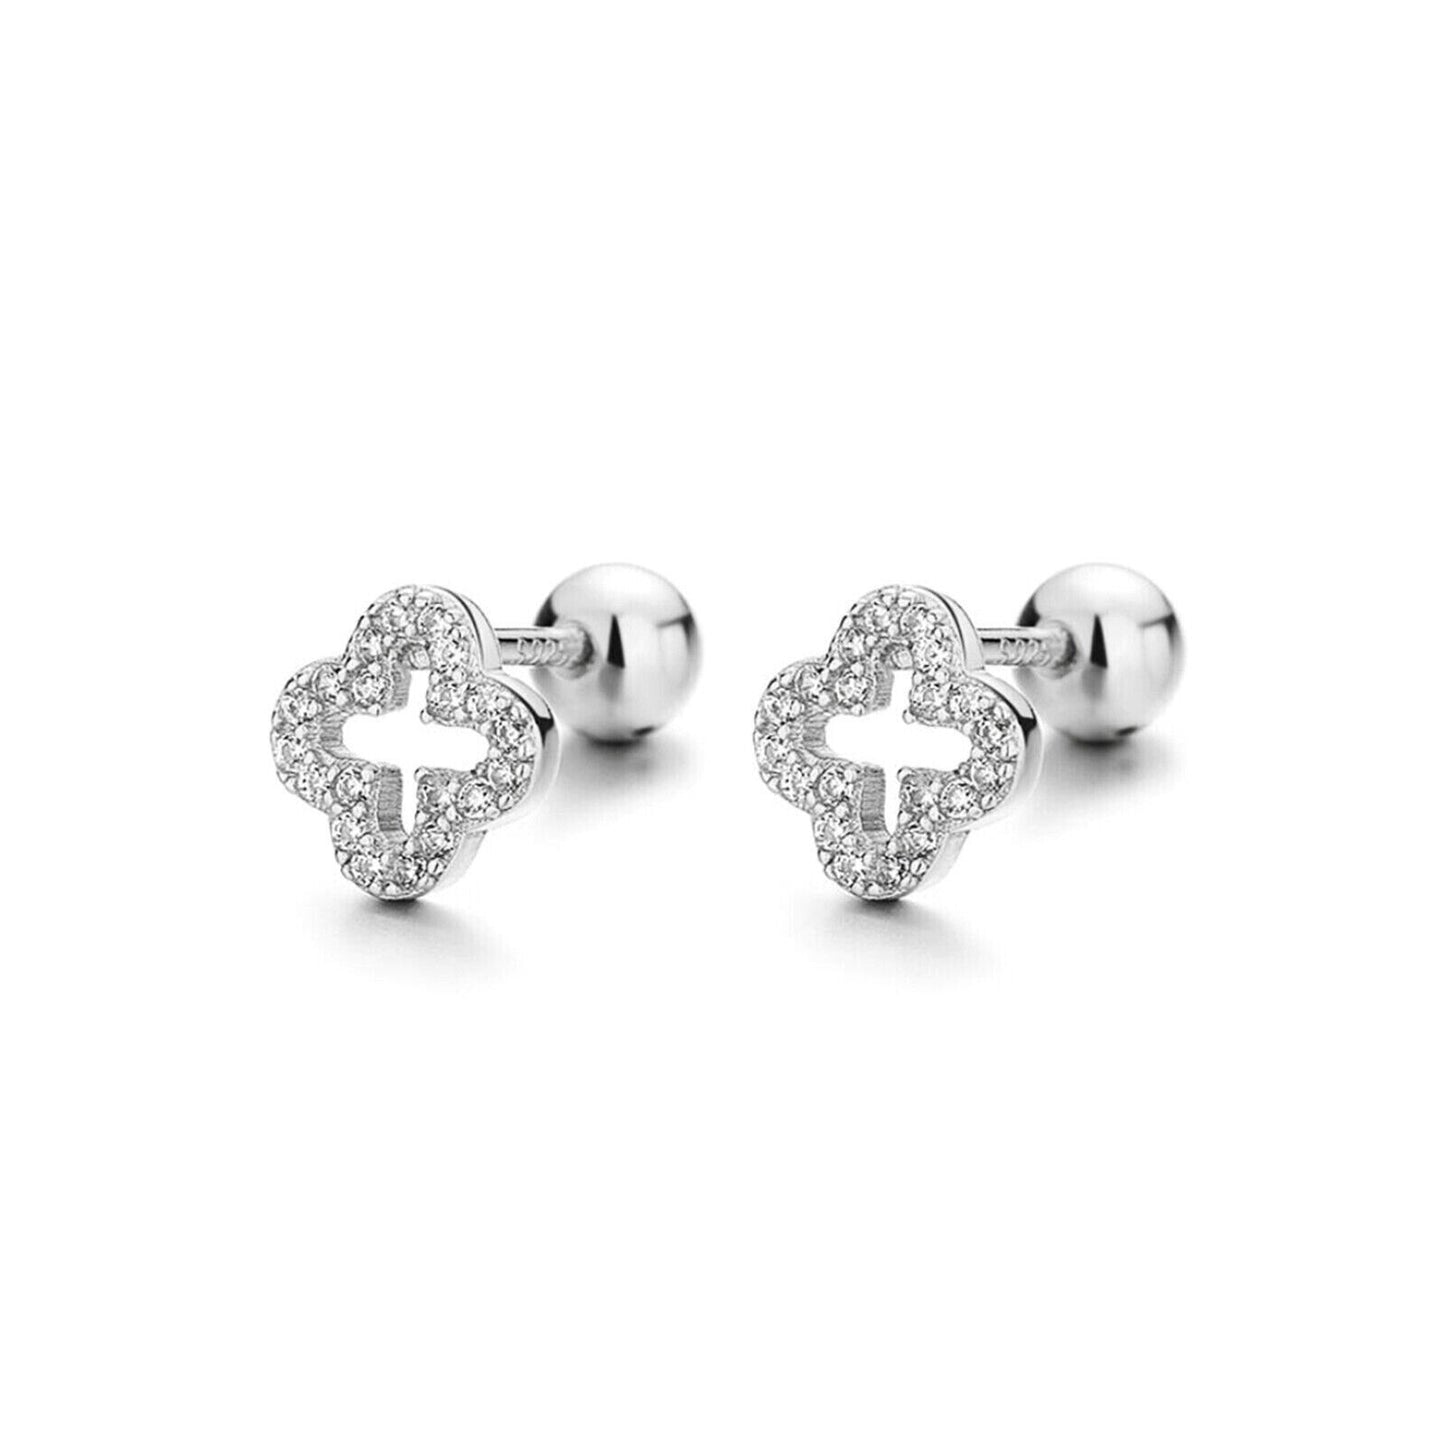 925 Sterling Silver 4 Leaf Clover Pave CZ Bead Ball Screw Back Stud Earrings